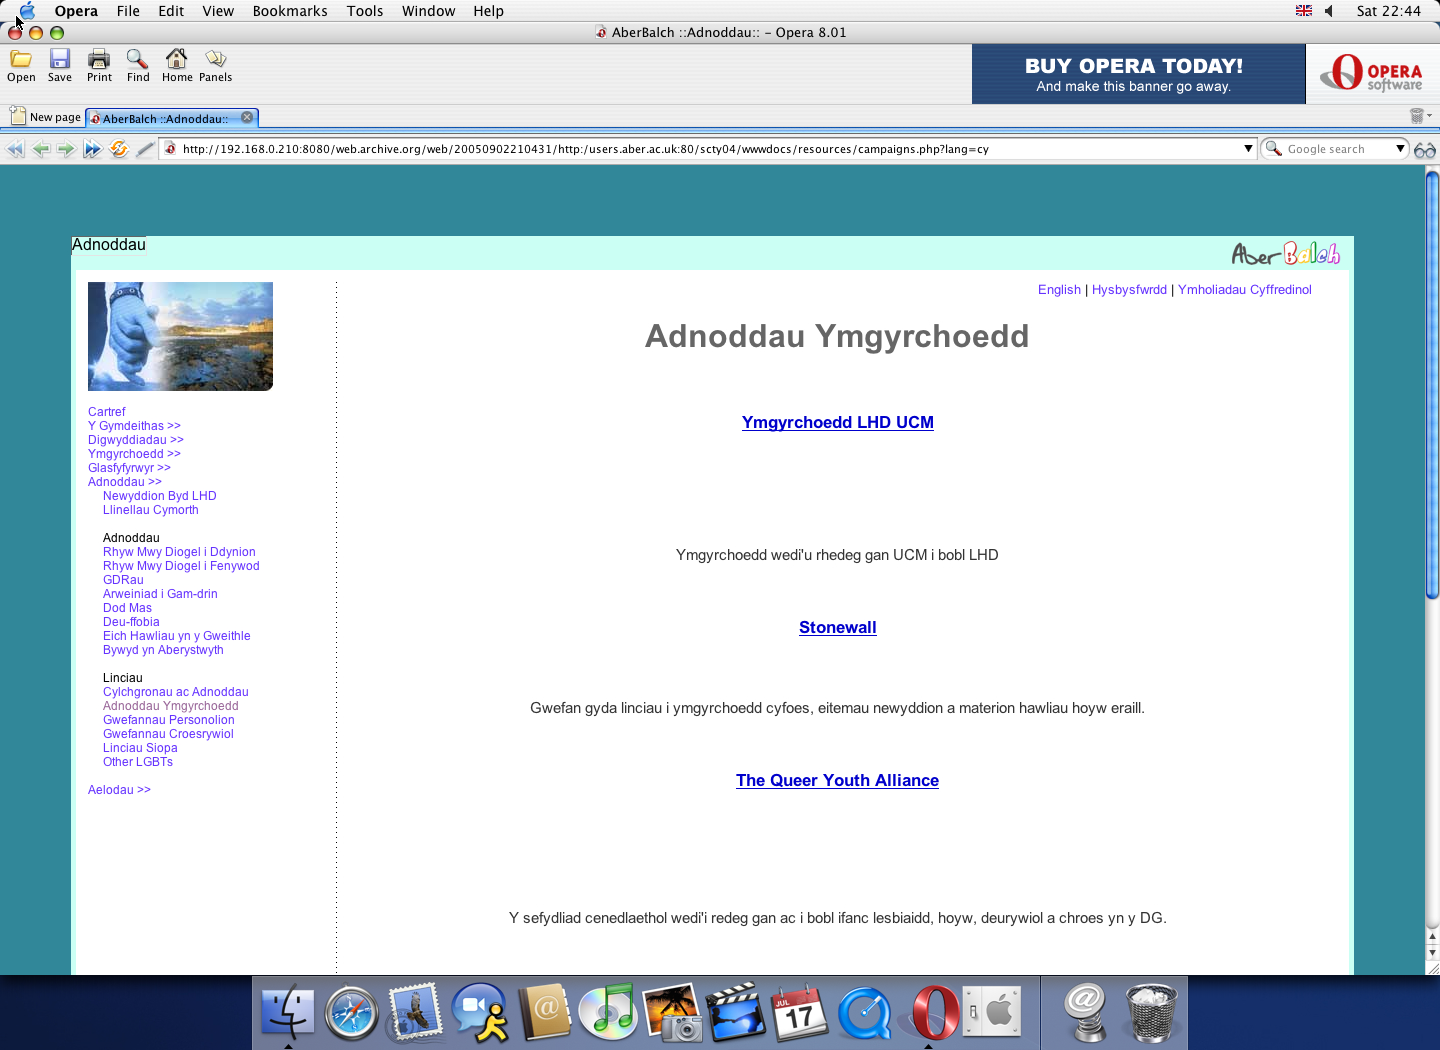 OS X 10.3 PPC with Opera 8.01 displaying a page from University of Aberystwyth archived at September 02, 2005 at 21:04:31